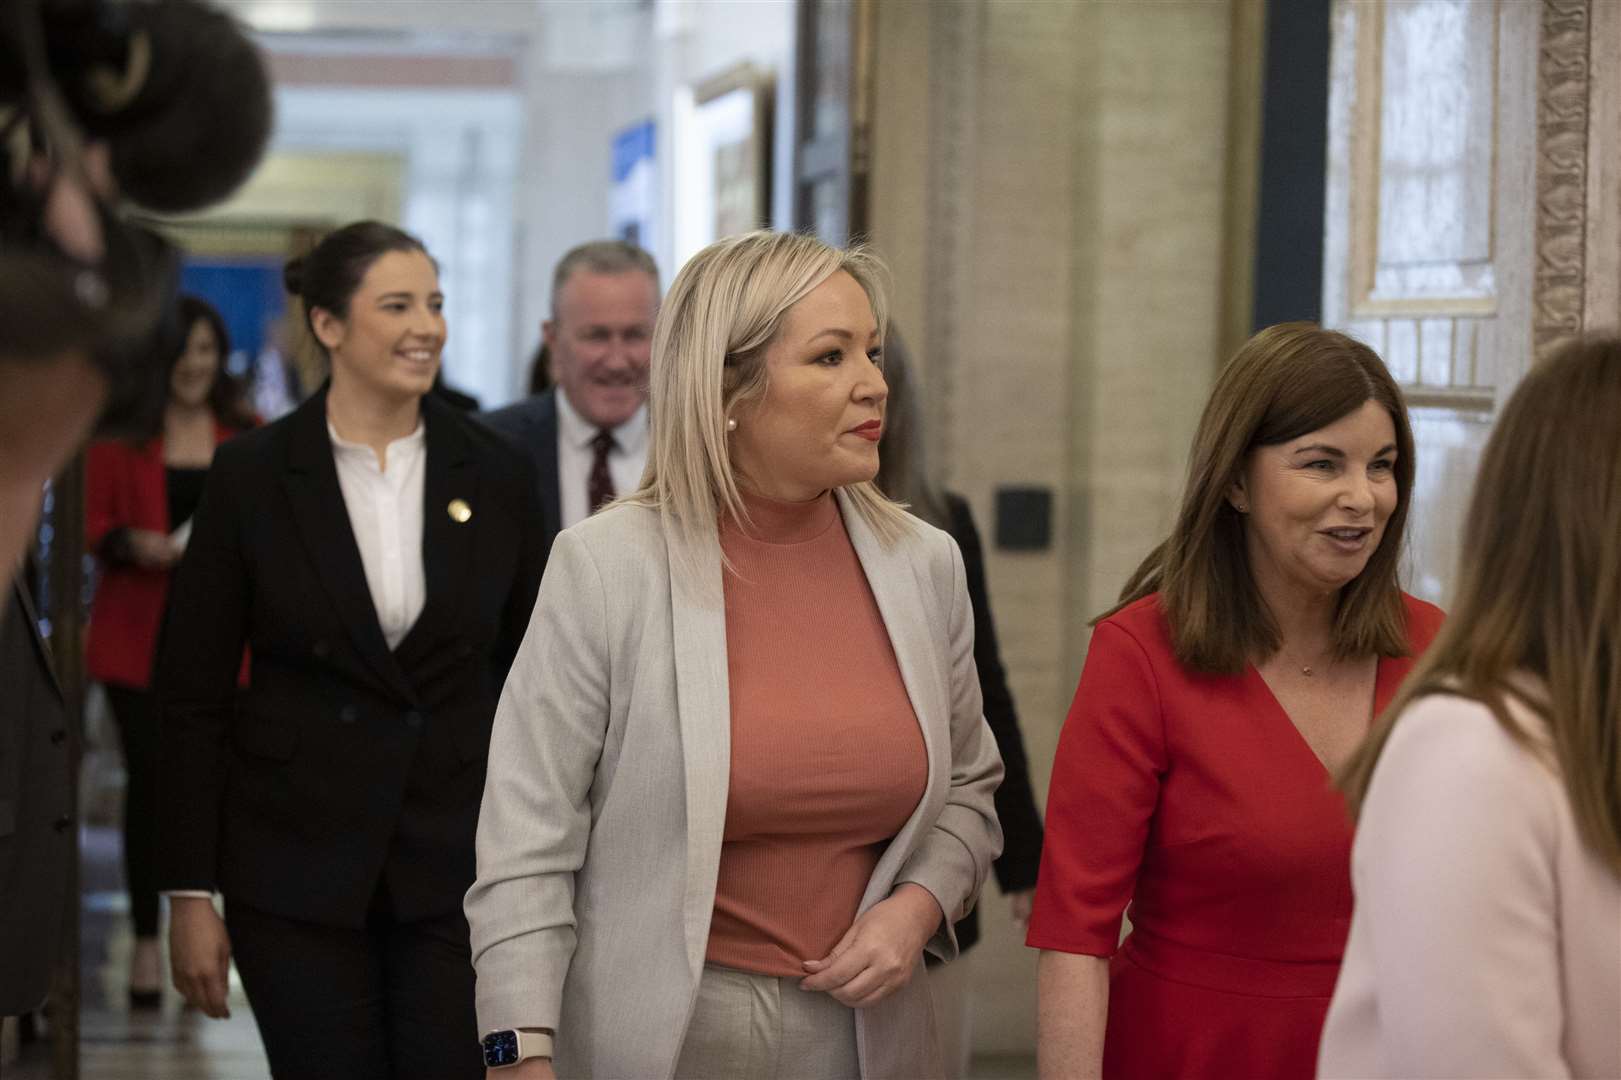 Sinn Fein Vice-President Michelle O’Neill walking out of the Northern Ireland Assembly Chamber on Friday (Liam McBurney/PA)